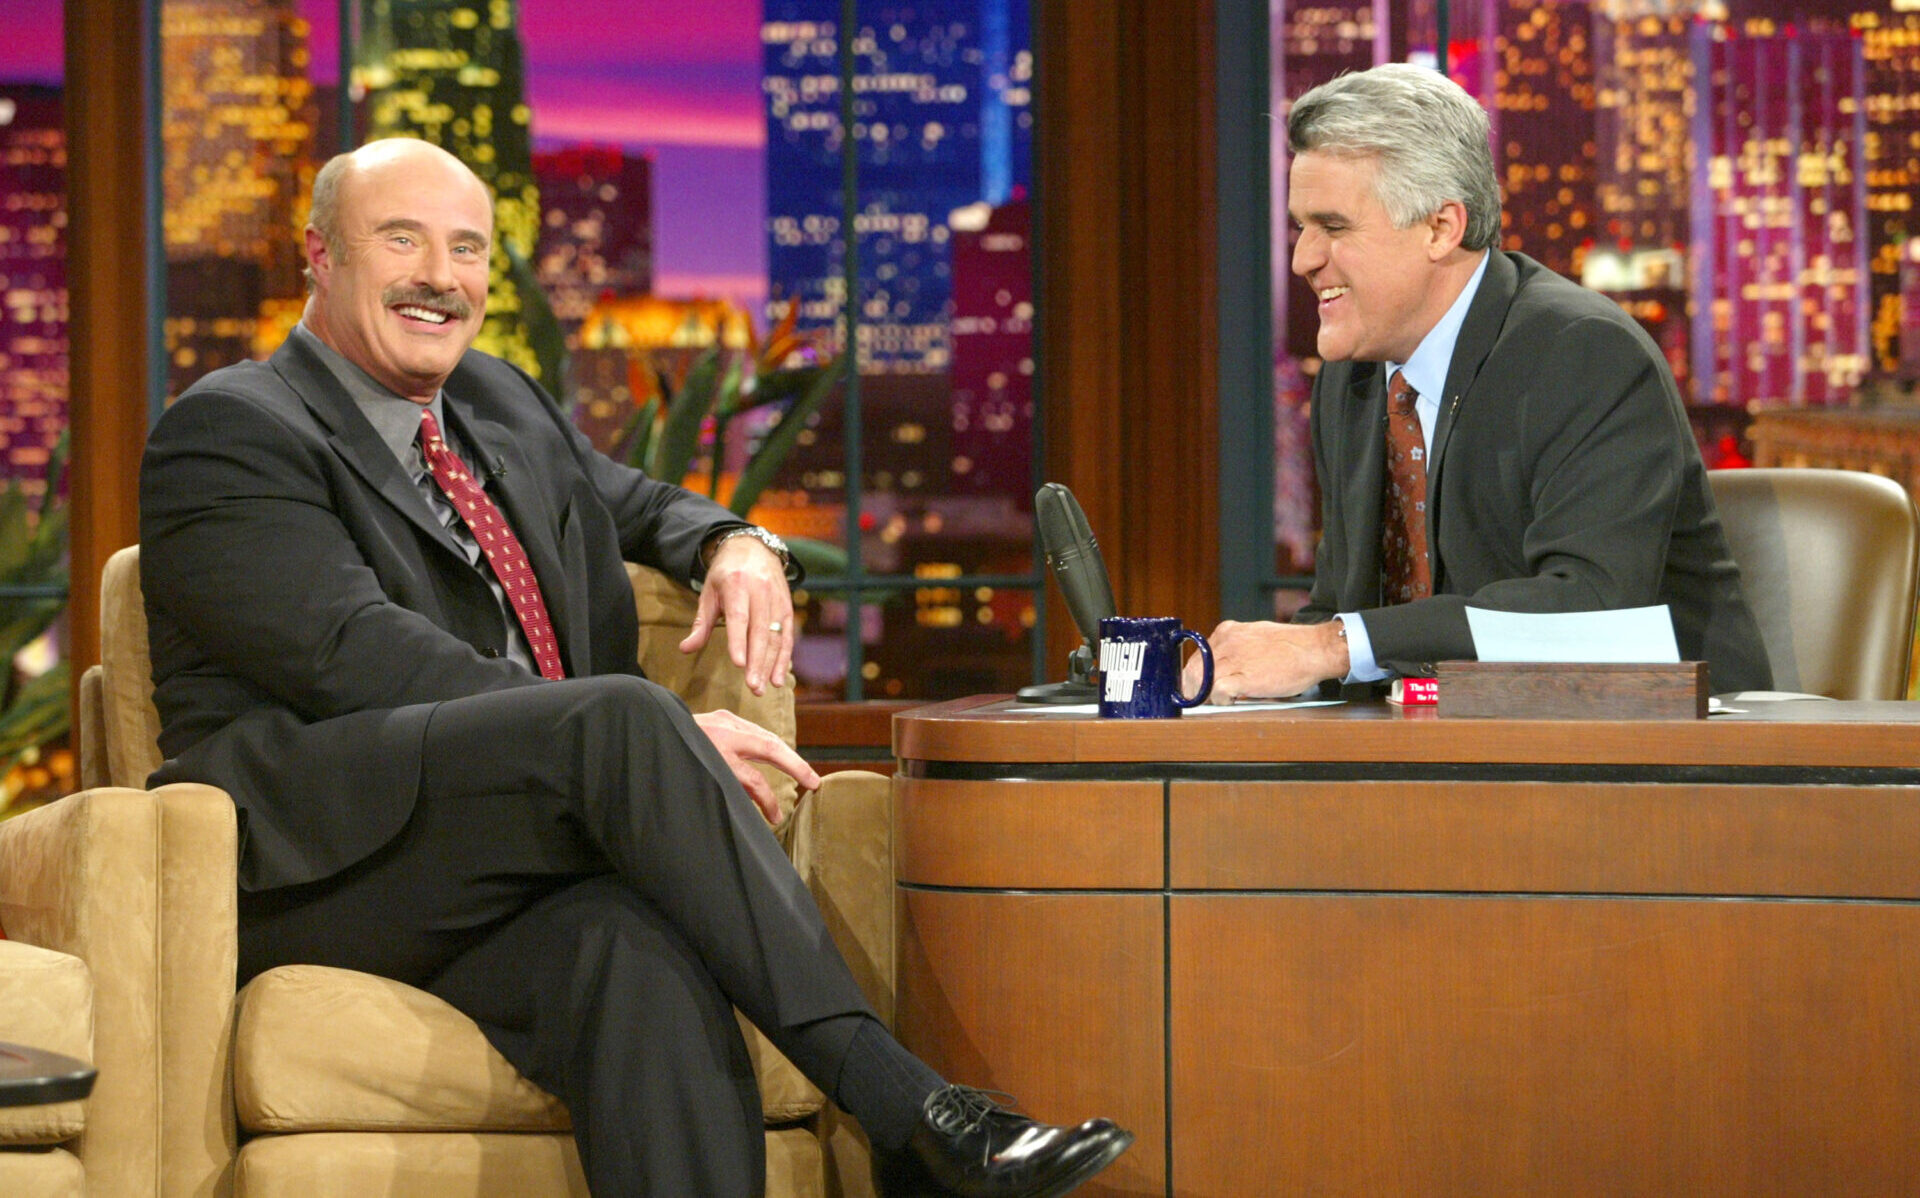 BURBANK, CA - OCTOBER 30: Talk show host Dr. Phil McGraw appears on "The Tonight Show with Jay Leno" at the NBC Studios on October 30, 2003 in Burbank, California. (Photo by Kevin Winter/Getty Images)